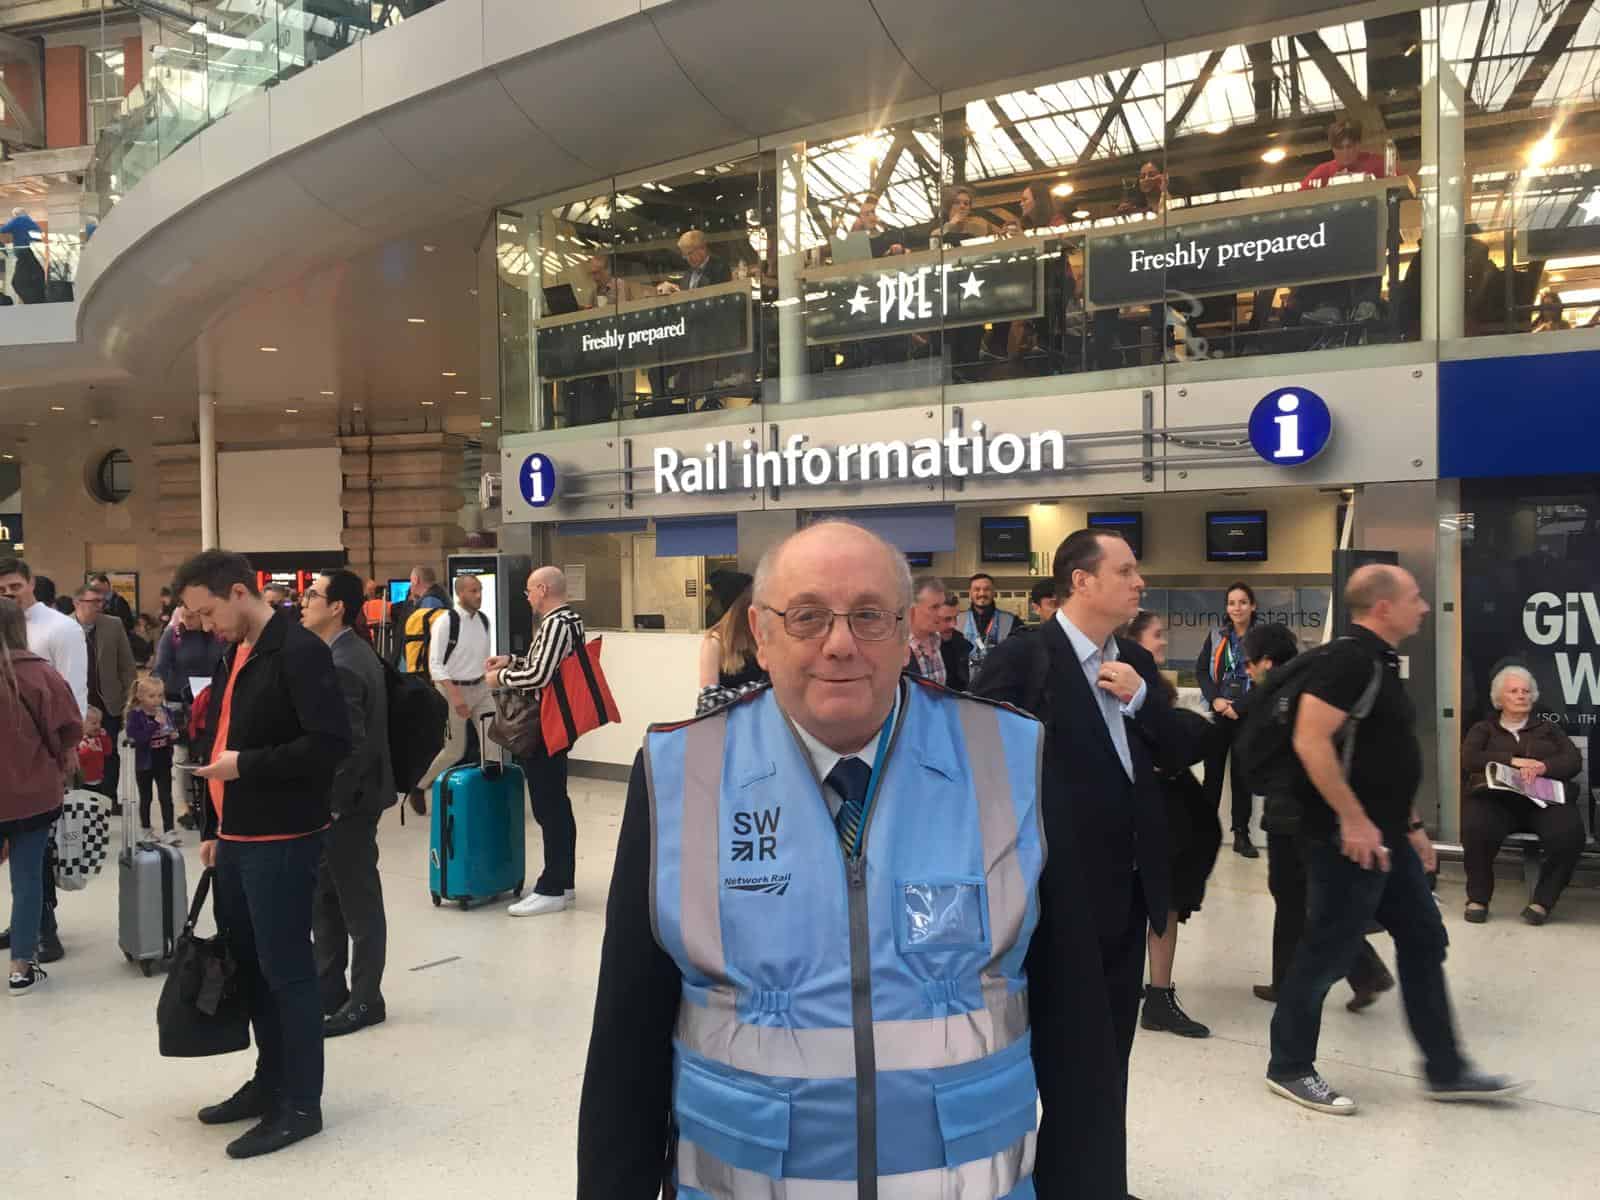 Jeffery joined the railway in 1961 - and isn't planning on giving up anytime soon